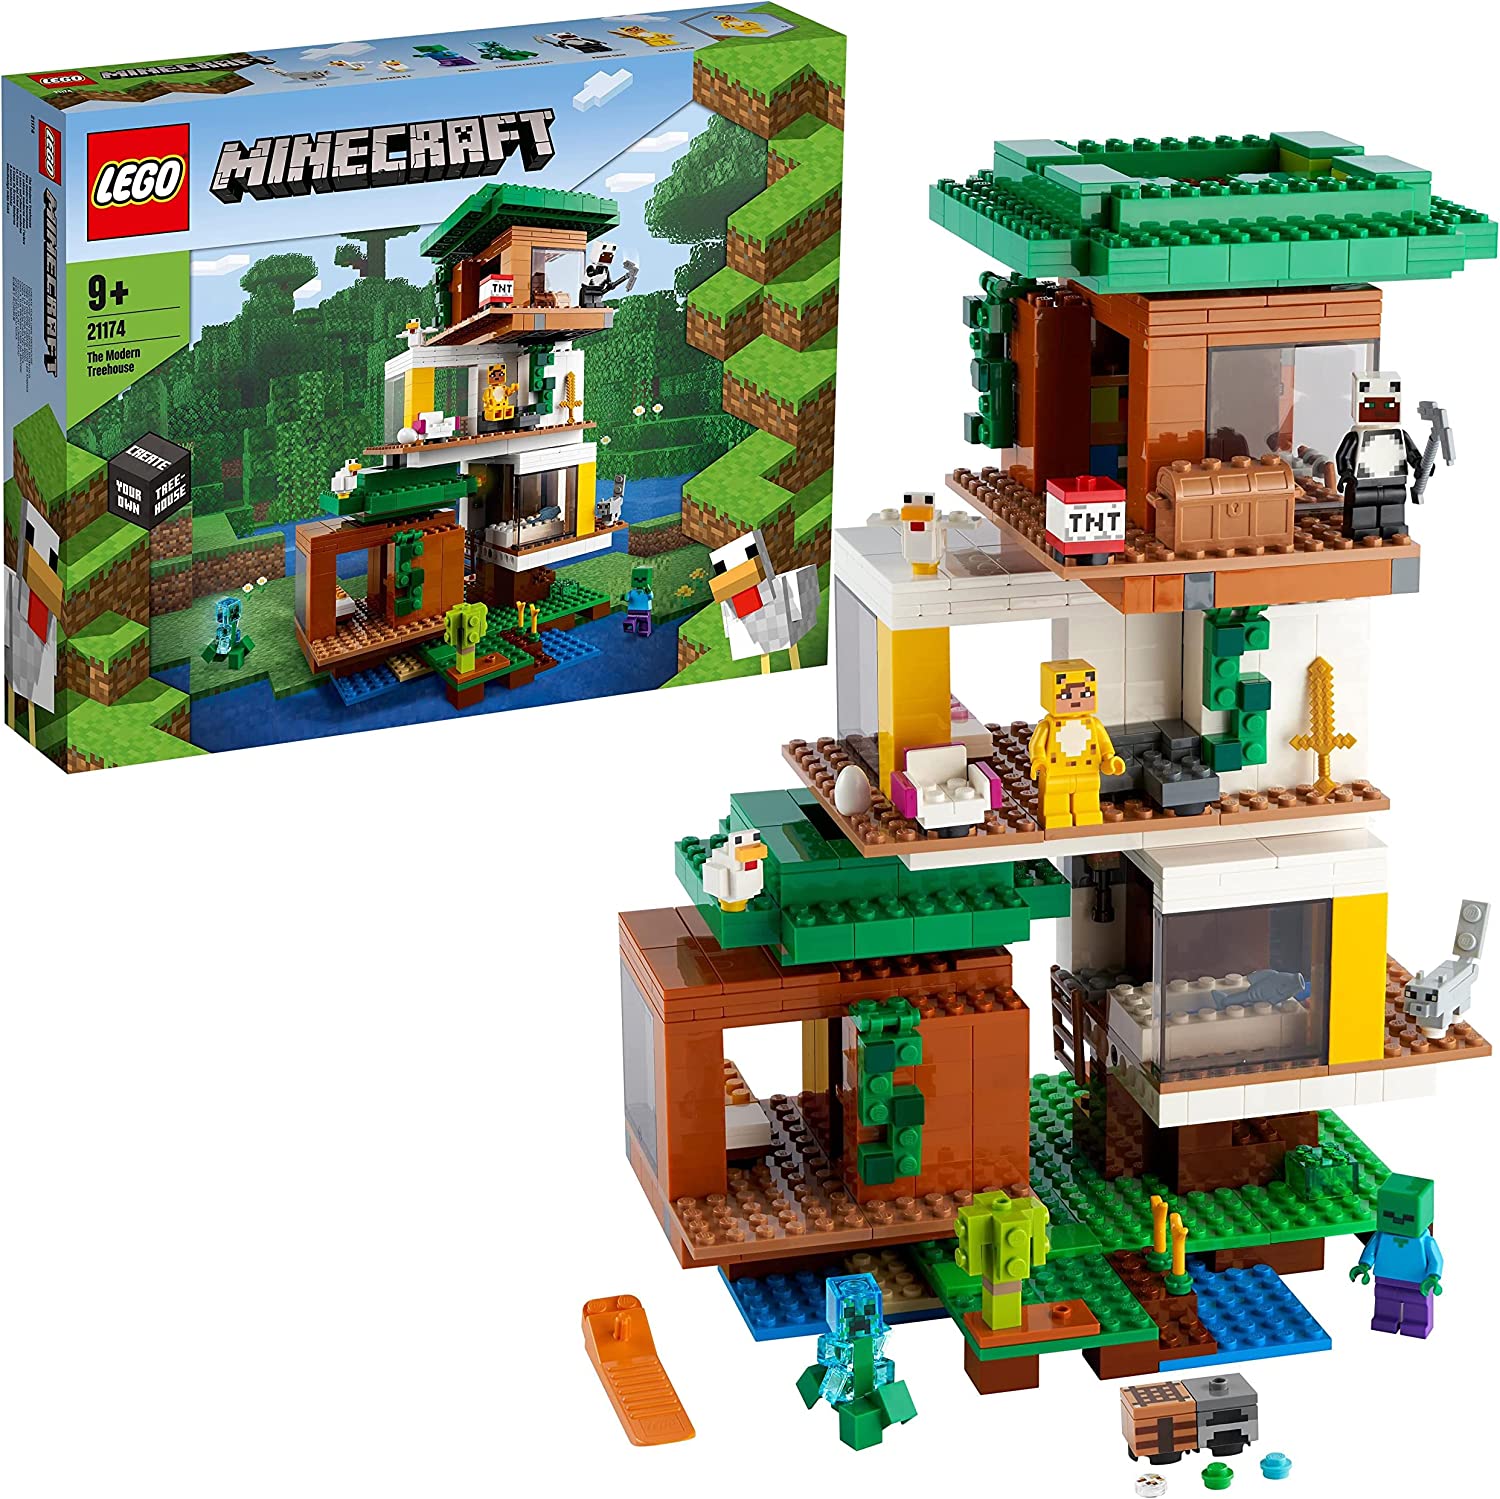 LEGO 21174 Minecraft - The Modern Tree House toy, set for boys and girls from 9 years with figures